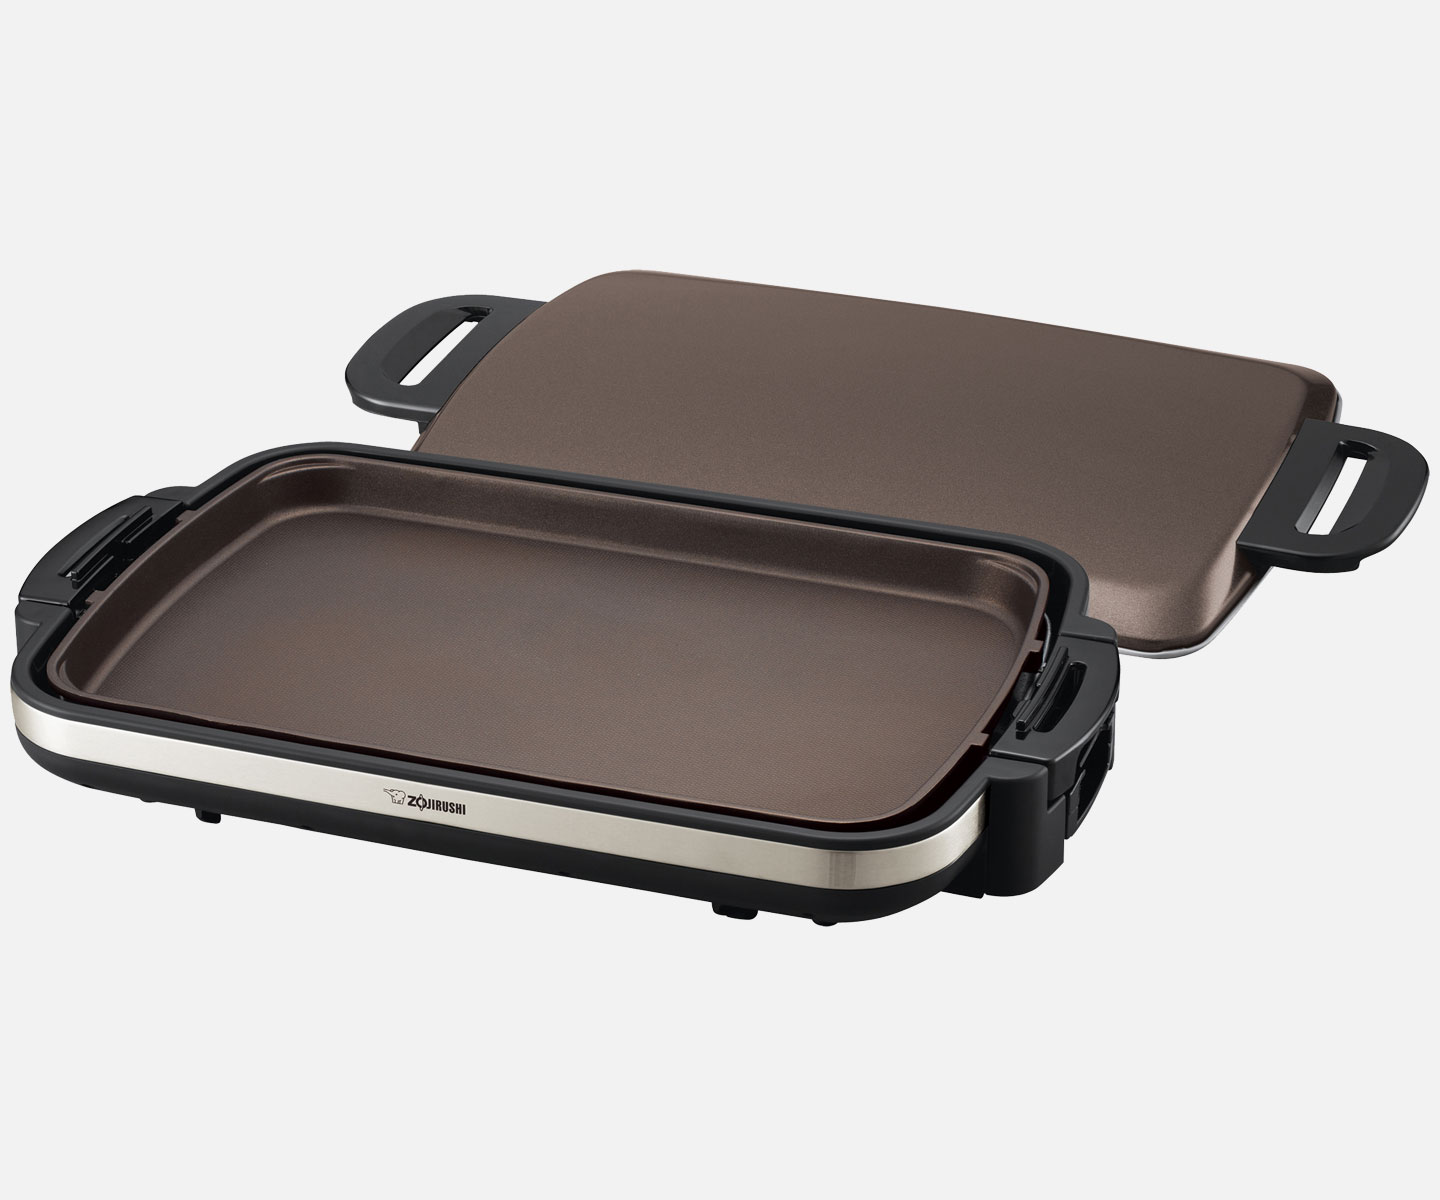 Gourmet Sizzler Electric Griddle